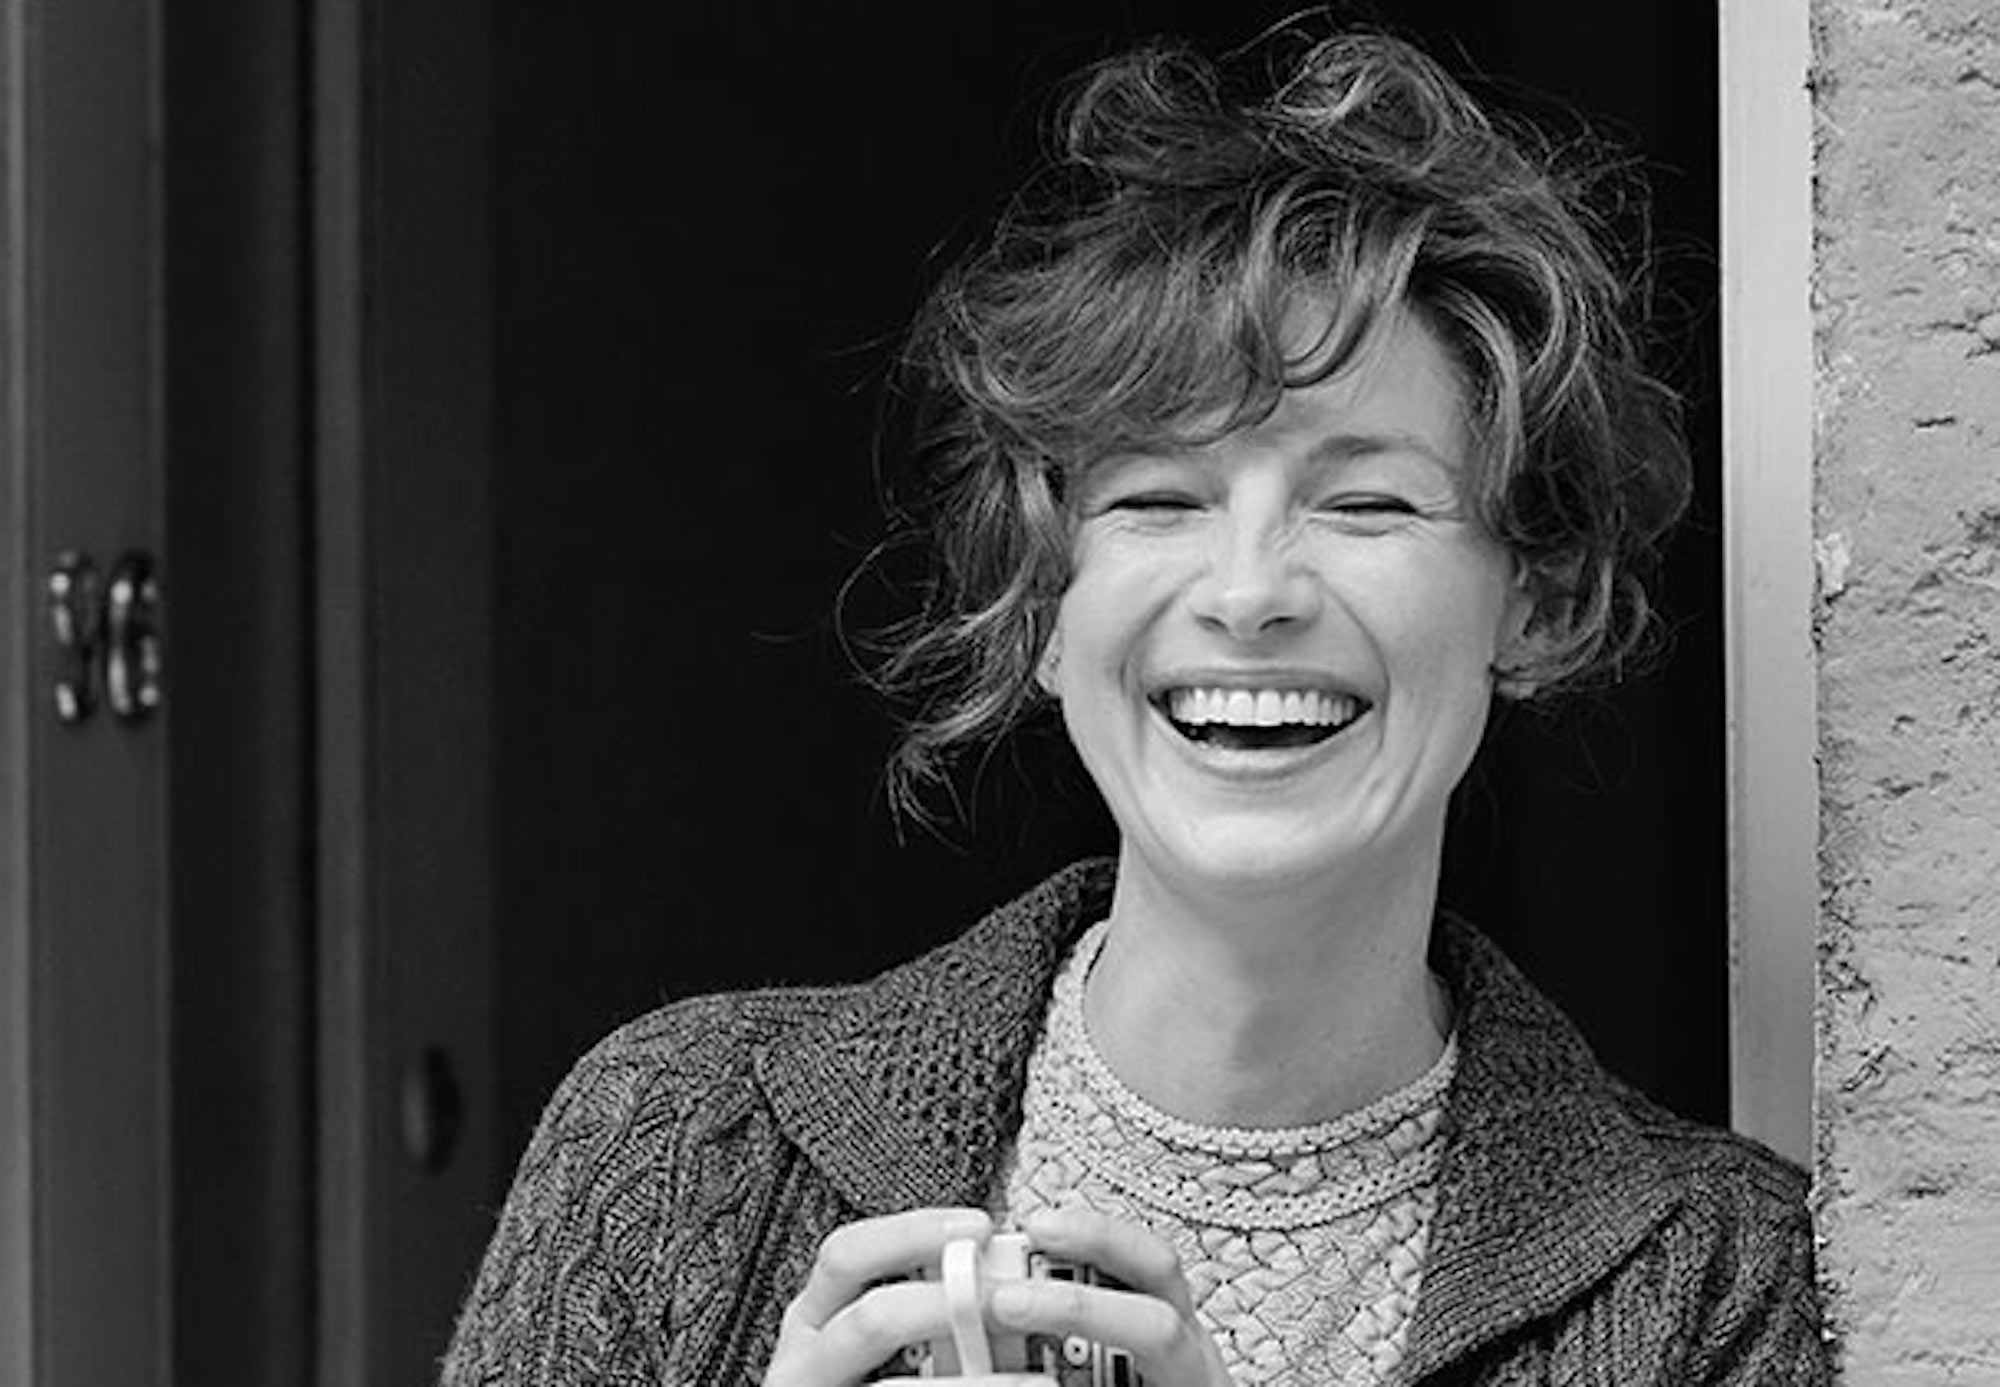 Caitriona Balfe in 'Belfast.' In this black-and-white still from the Kenneth Branagh movie, Balfe stands in a doorway laughing with a teacup in her hands. She wears two sweaters and her hair is curly and up on her head.